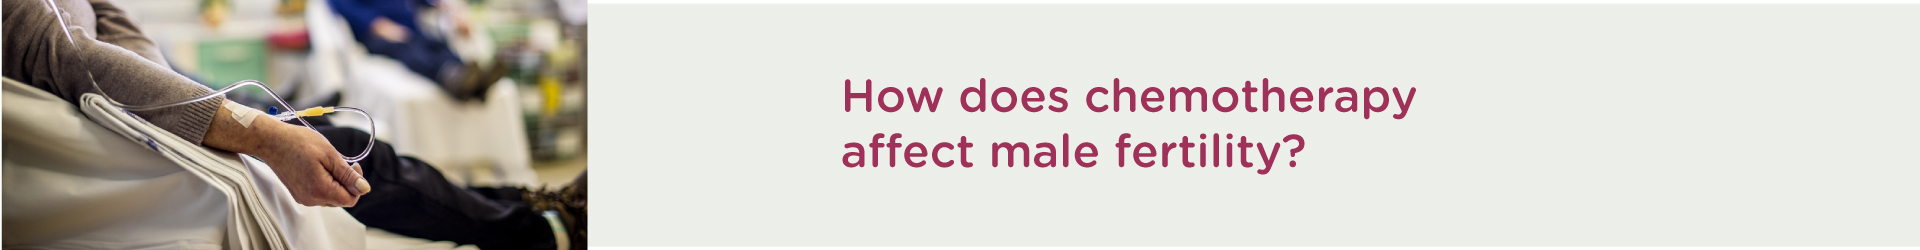 How Does Chemotherapy Affect Male Fertility?